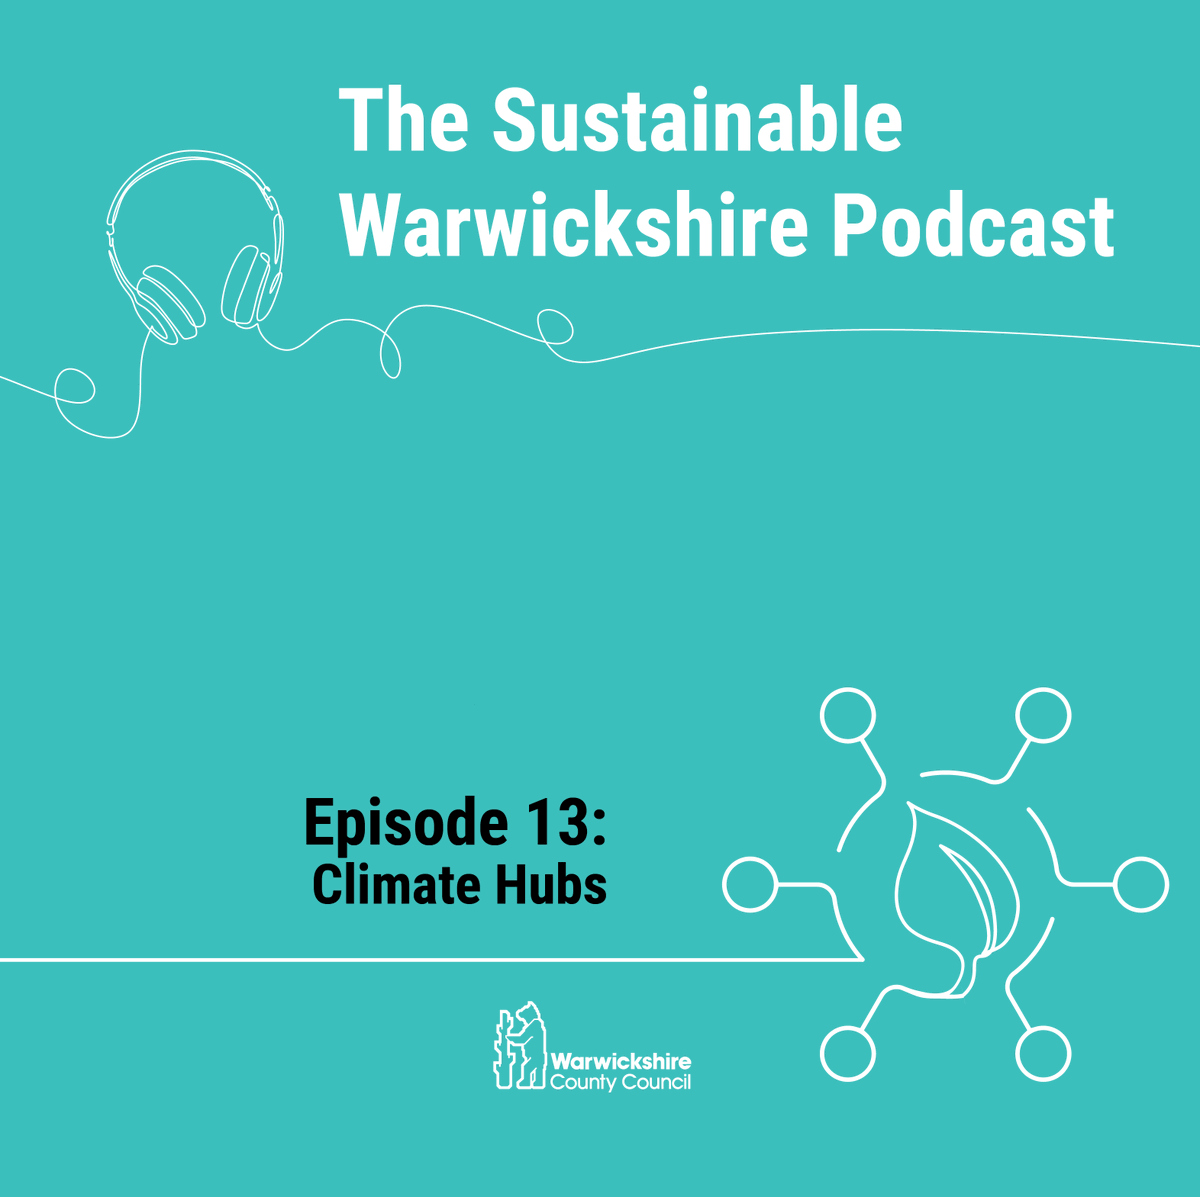 “You know, there's a lot of people interested in climate action, but still it's hard to get involved.” Are local climate hubs the answer? Listen to the latest Sustainable Warwickshire episode to find out more and get involved: sustainablewarwickshire.podbean.com